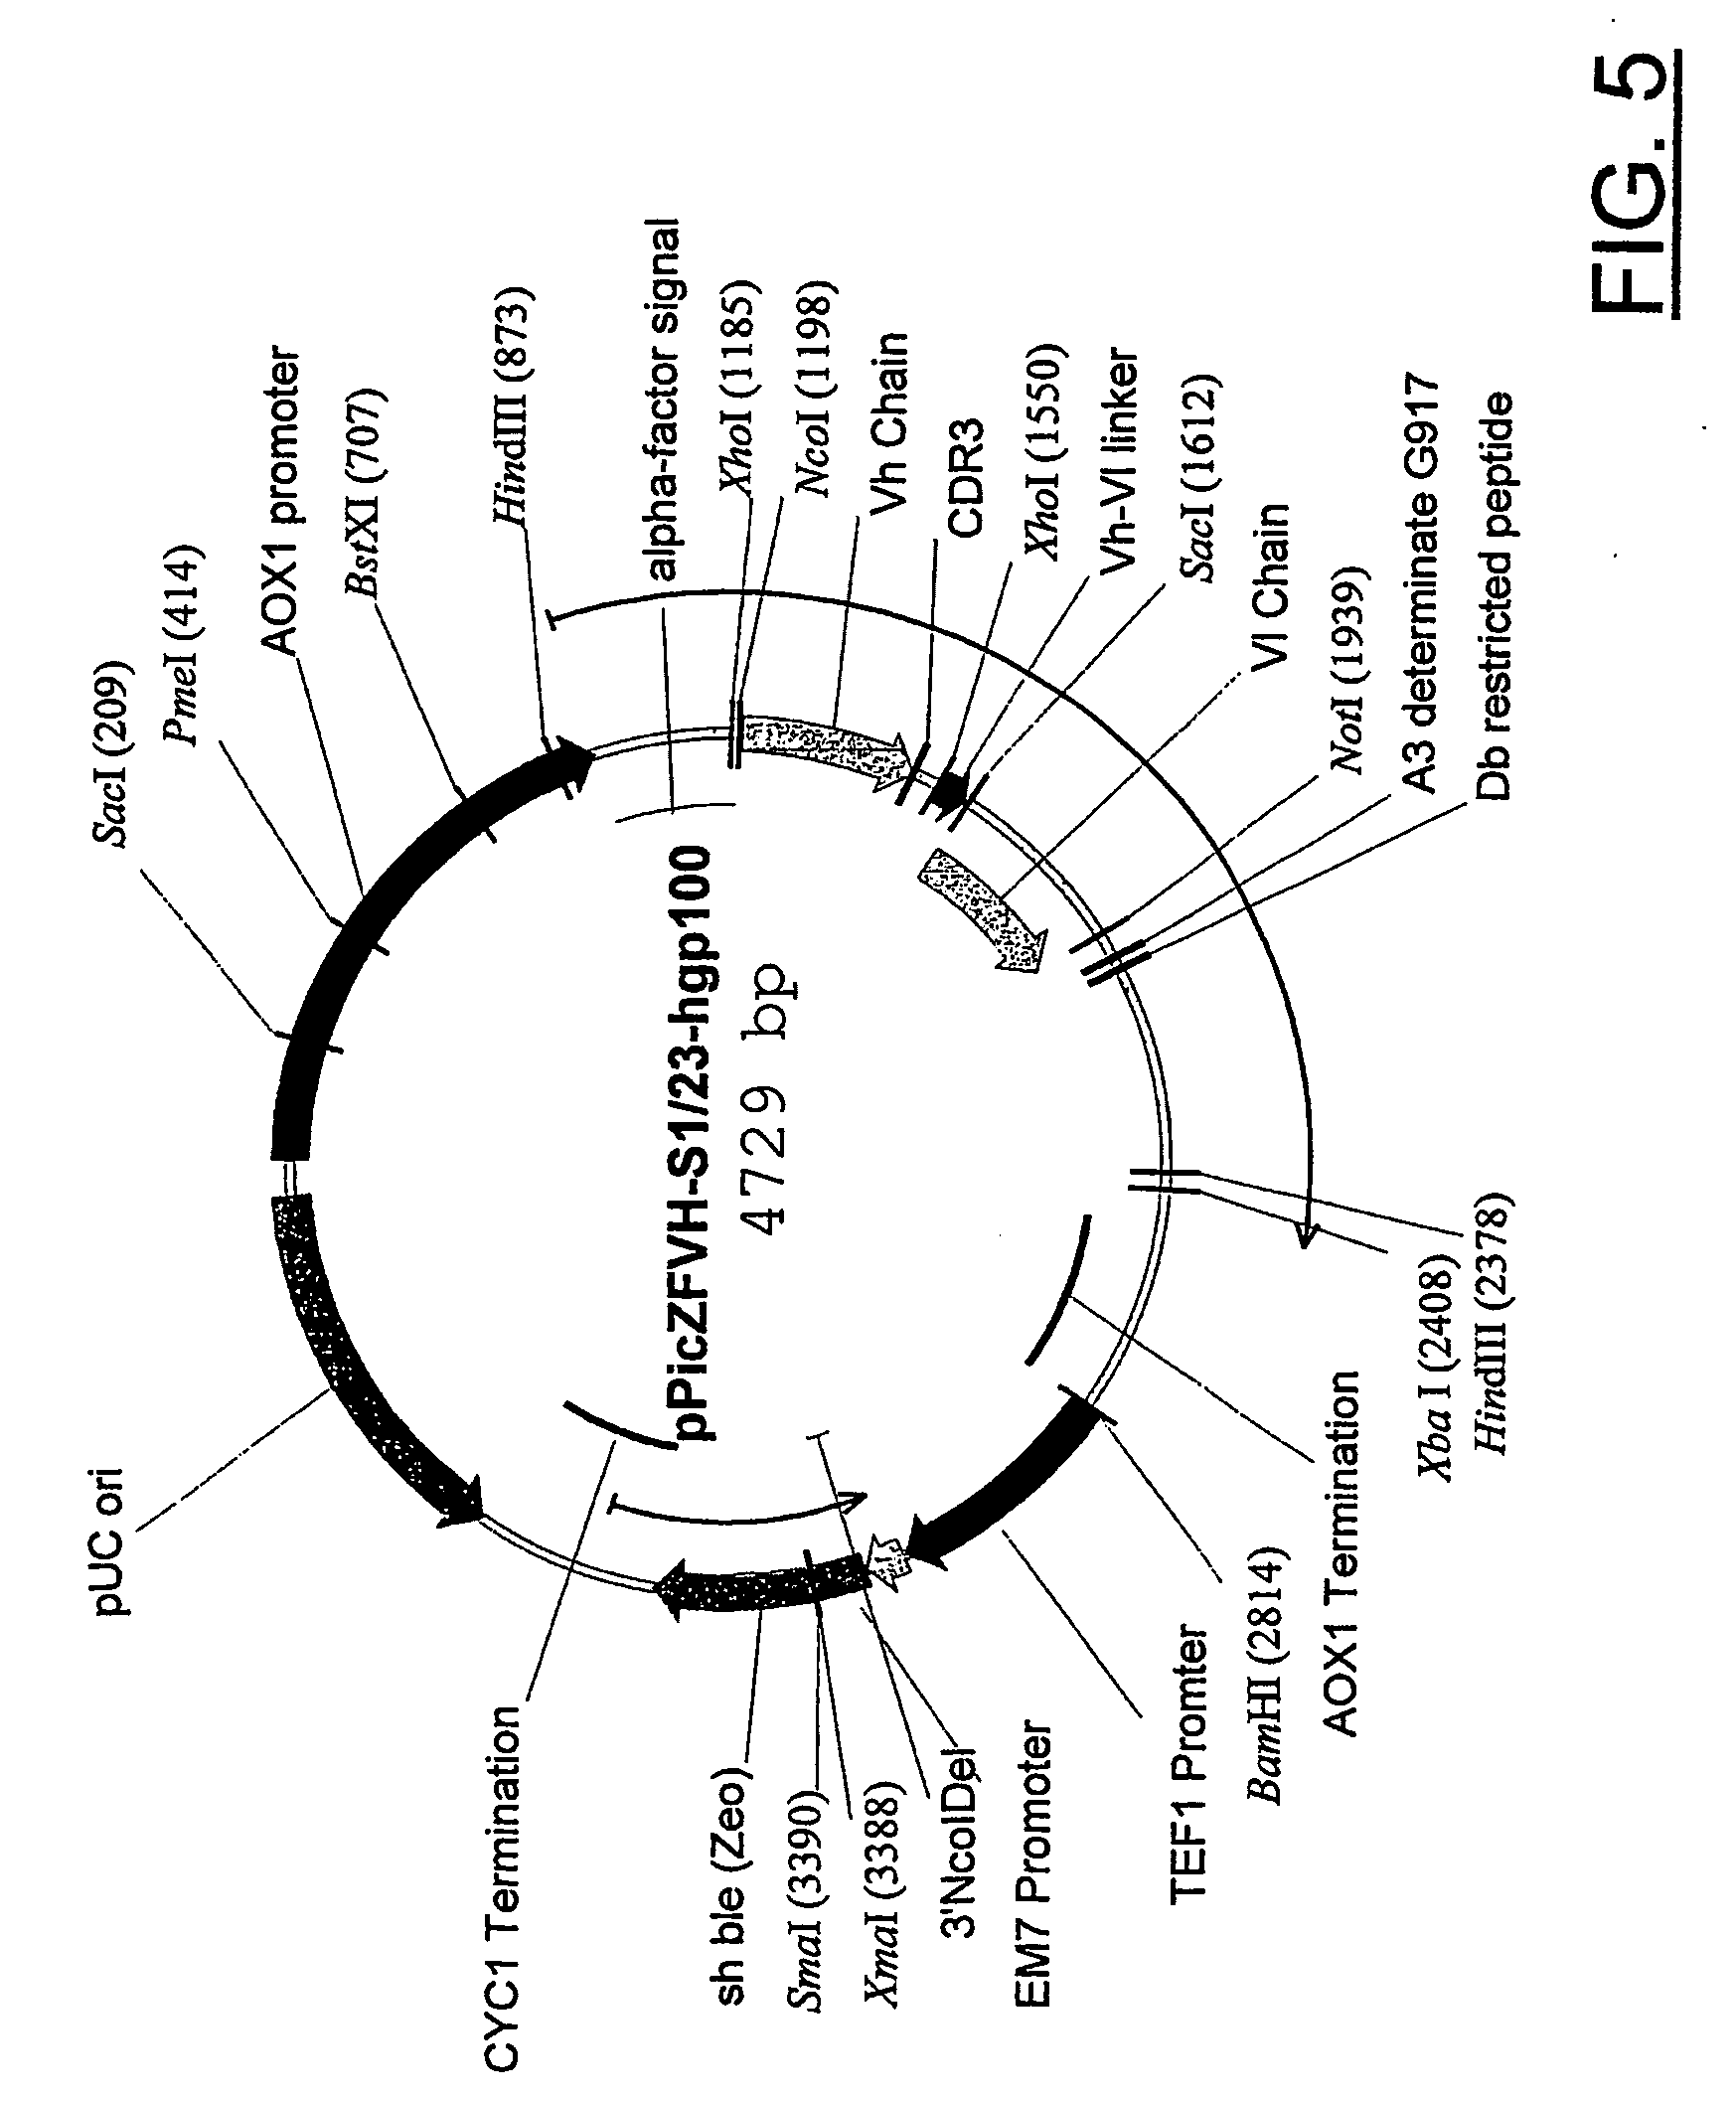 Antigen presenting cell targeting conjugate, an antigen presenting cell contacted with such conjugate, their use for vaccination or as medicament, and methods for their production or generation